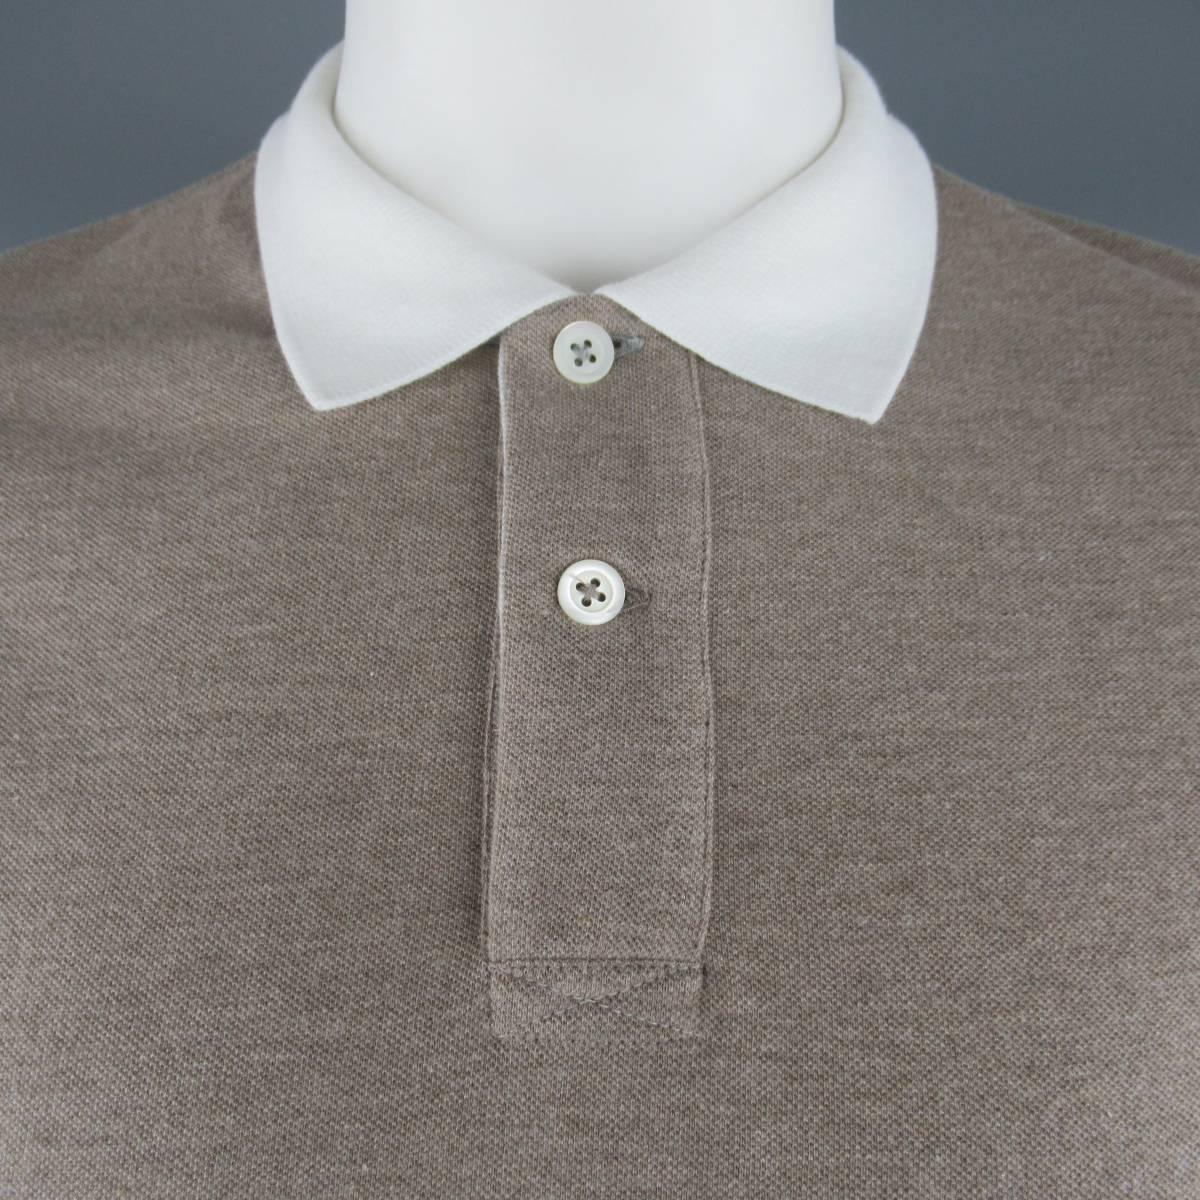 BRUNELLO CUCINELLI polo comes in heather taupe cotton pique with white contrast collar and arm bands. Made in Italy.
 
New with Tags.
Marked: XXL
 
Measurements:
 
Shoulder: 19.5 in.
Chest: 47 in.
Sleeve: 9.5 in.
Length: 30 in.

SKU: 84025